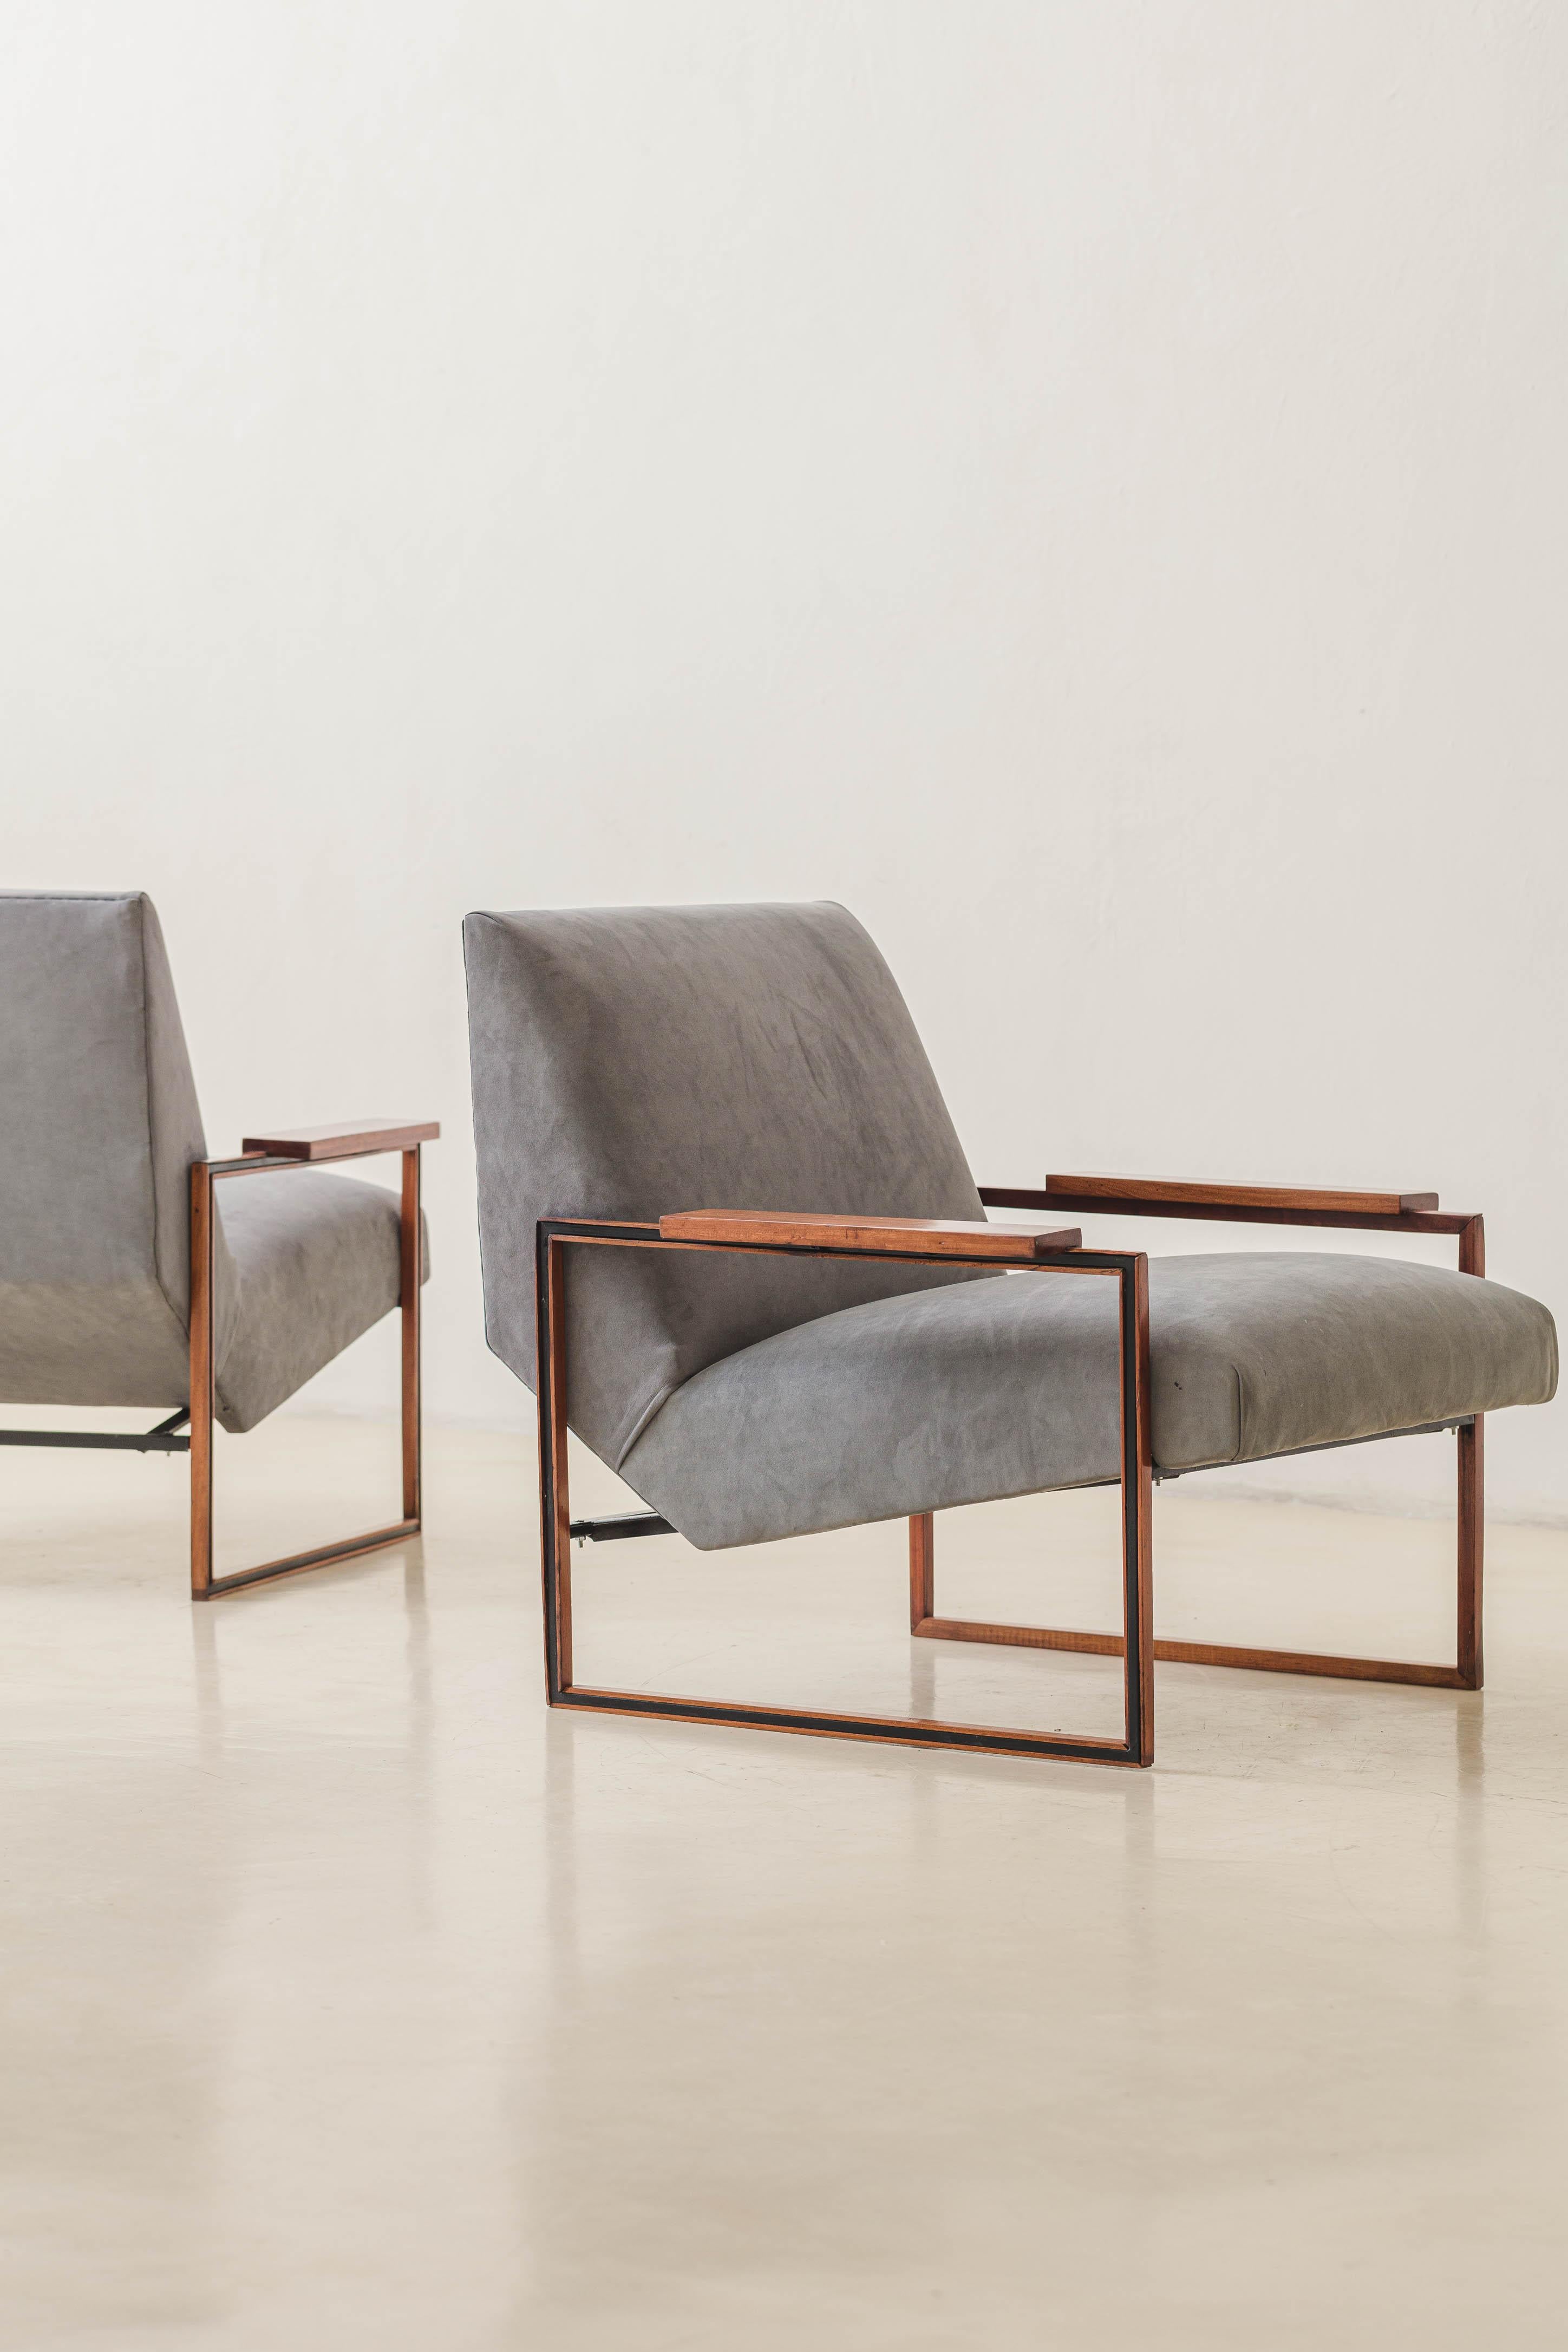 Pair of Brazilian Mp-5 Midcentury Lounge Chairs by Percival Lafer, 1970s For Sale 1